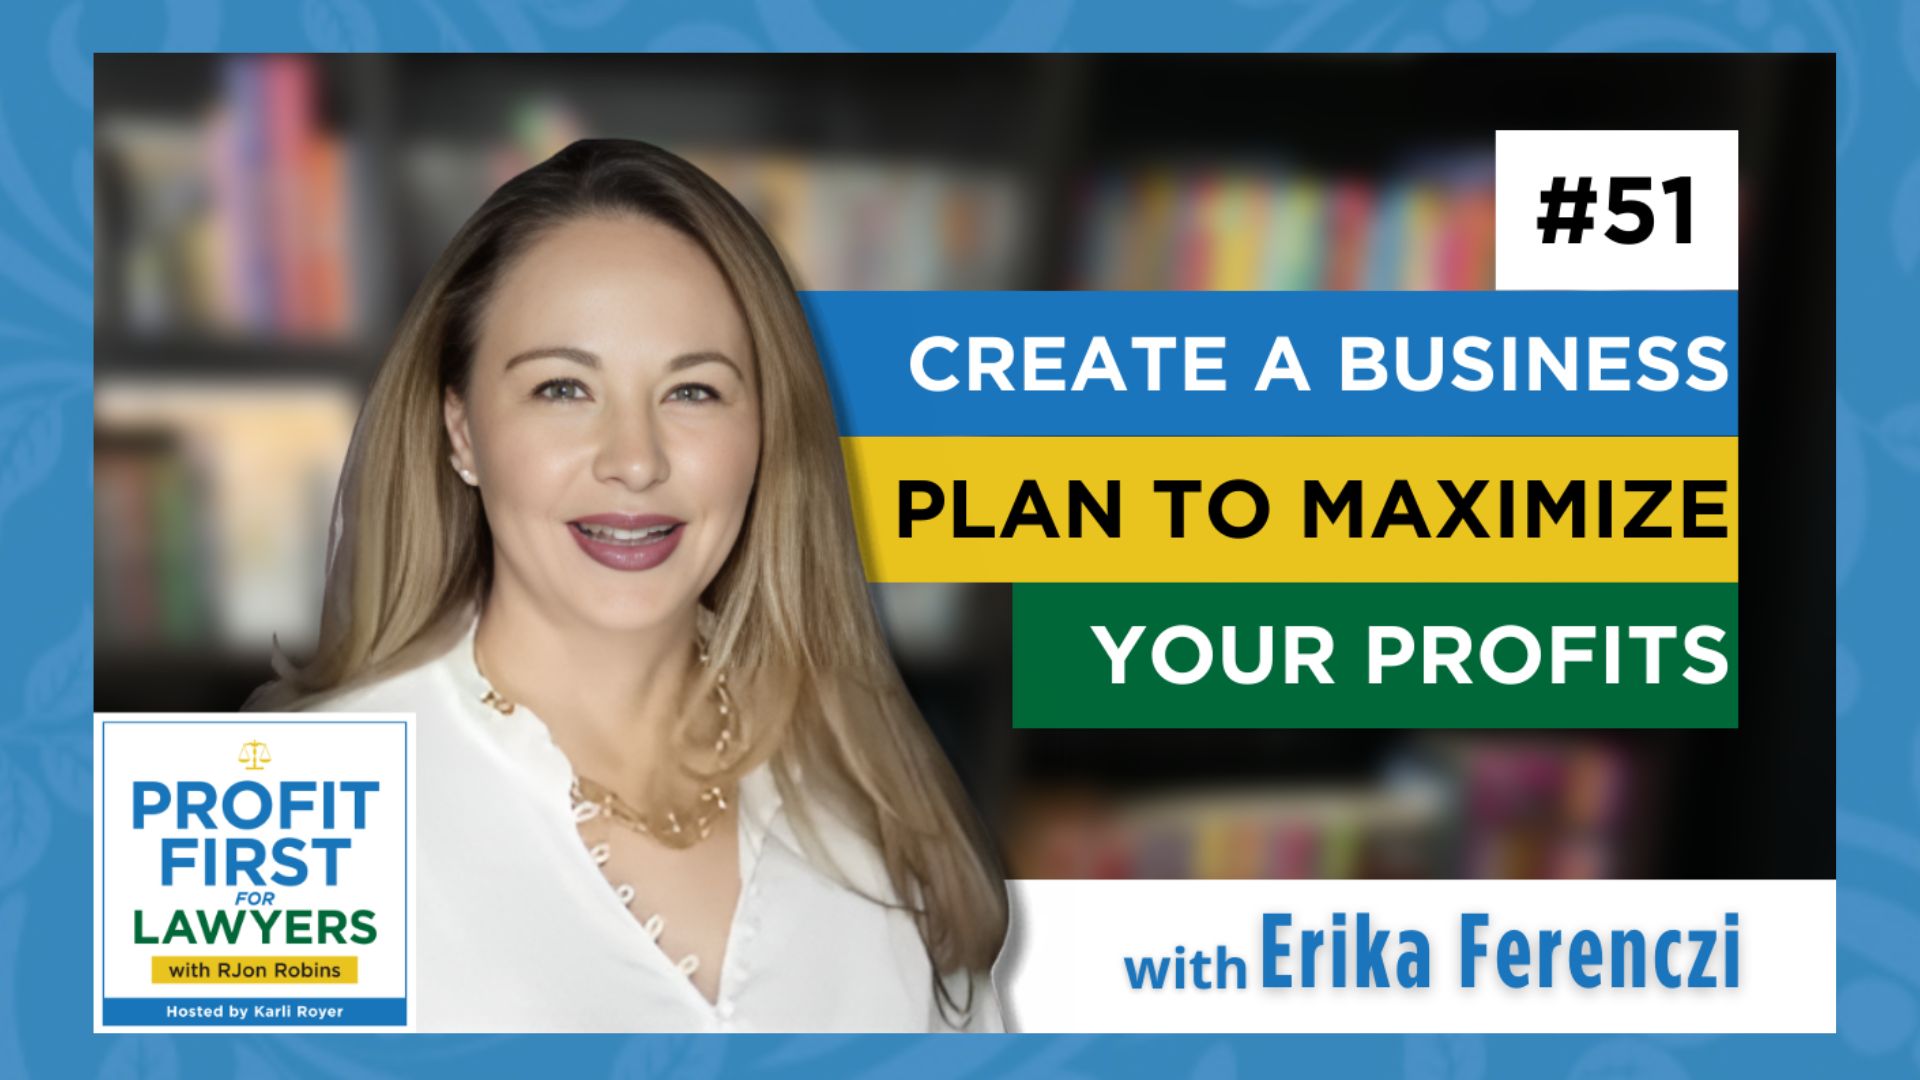 Featured image of Erika Ferenczi episode 51 "Create A Business Plan to Maximize Your Profits